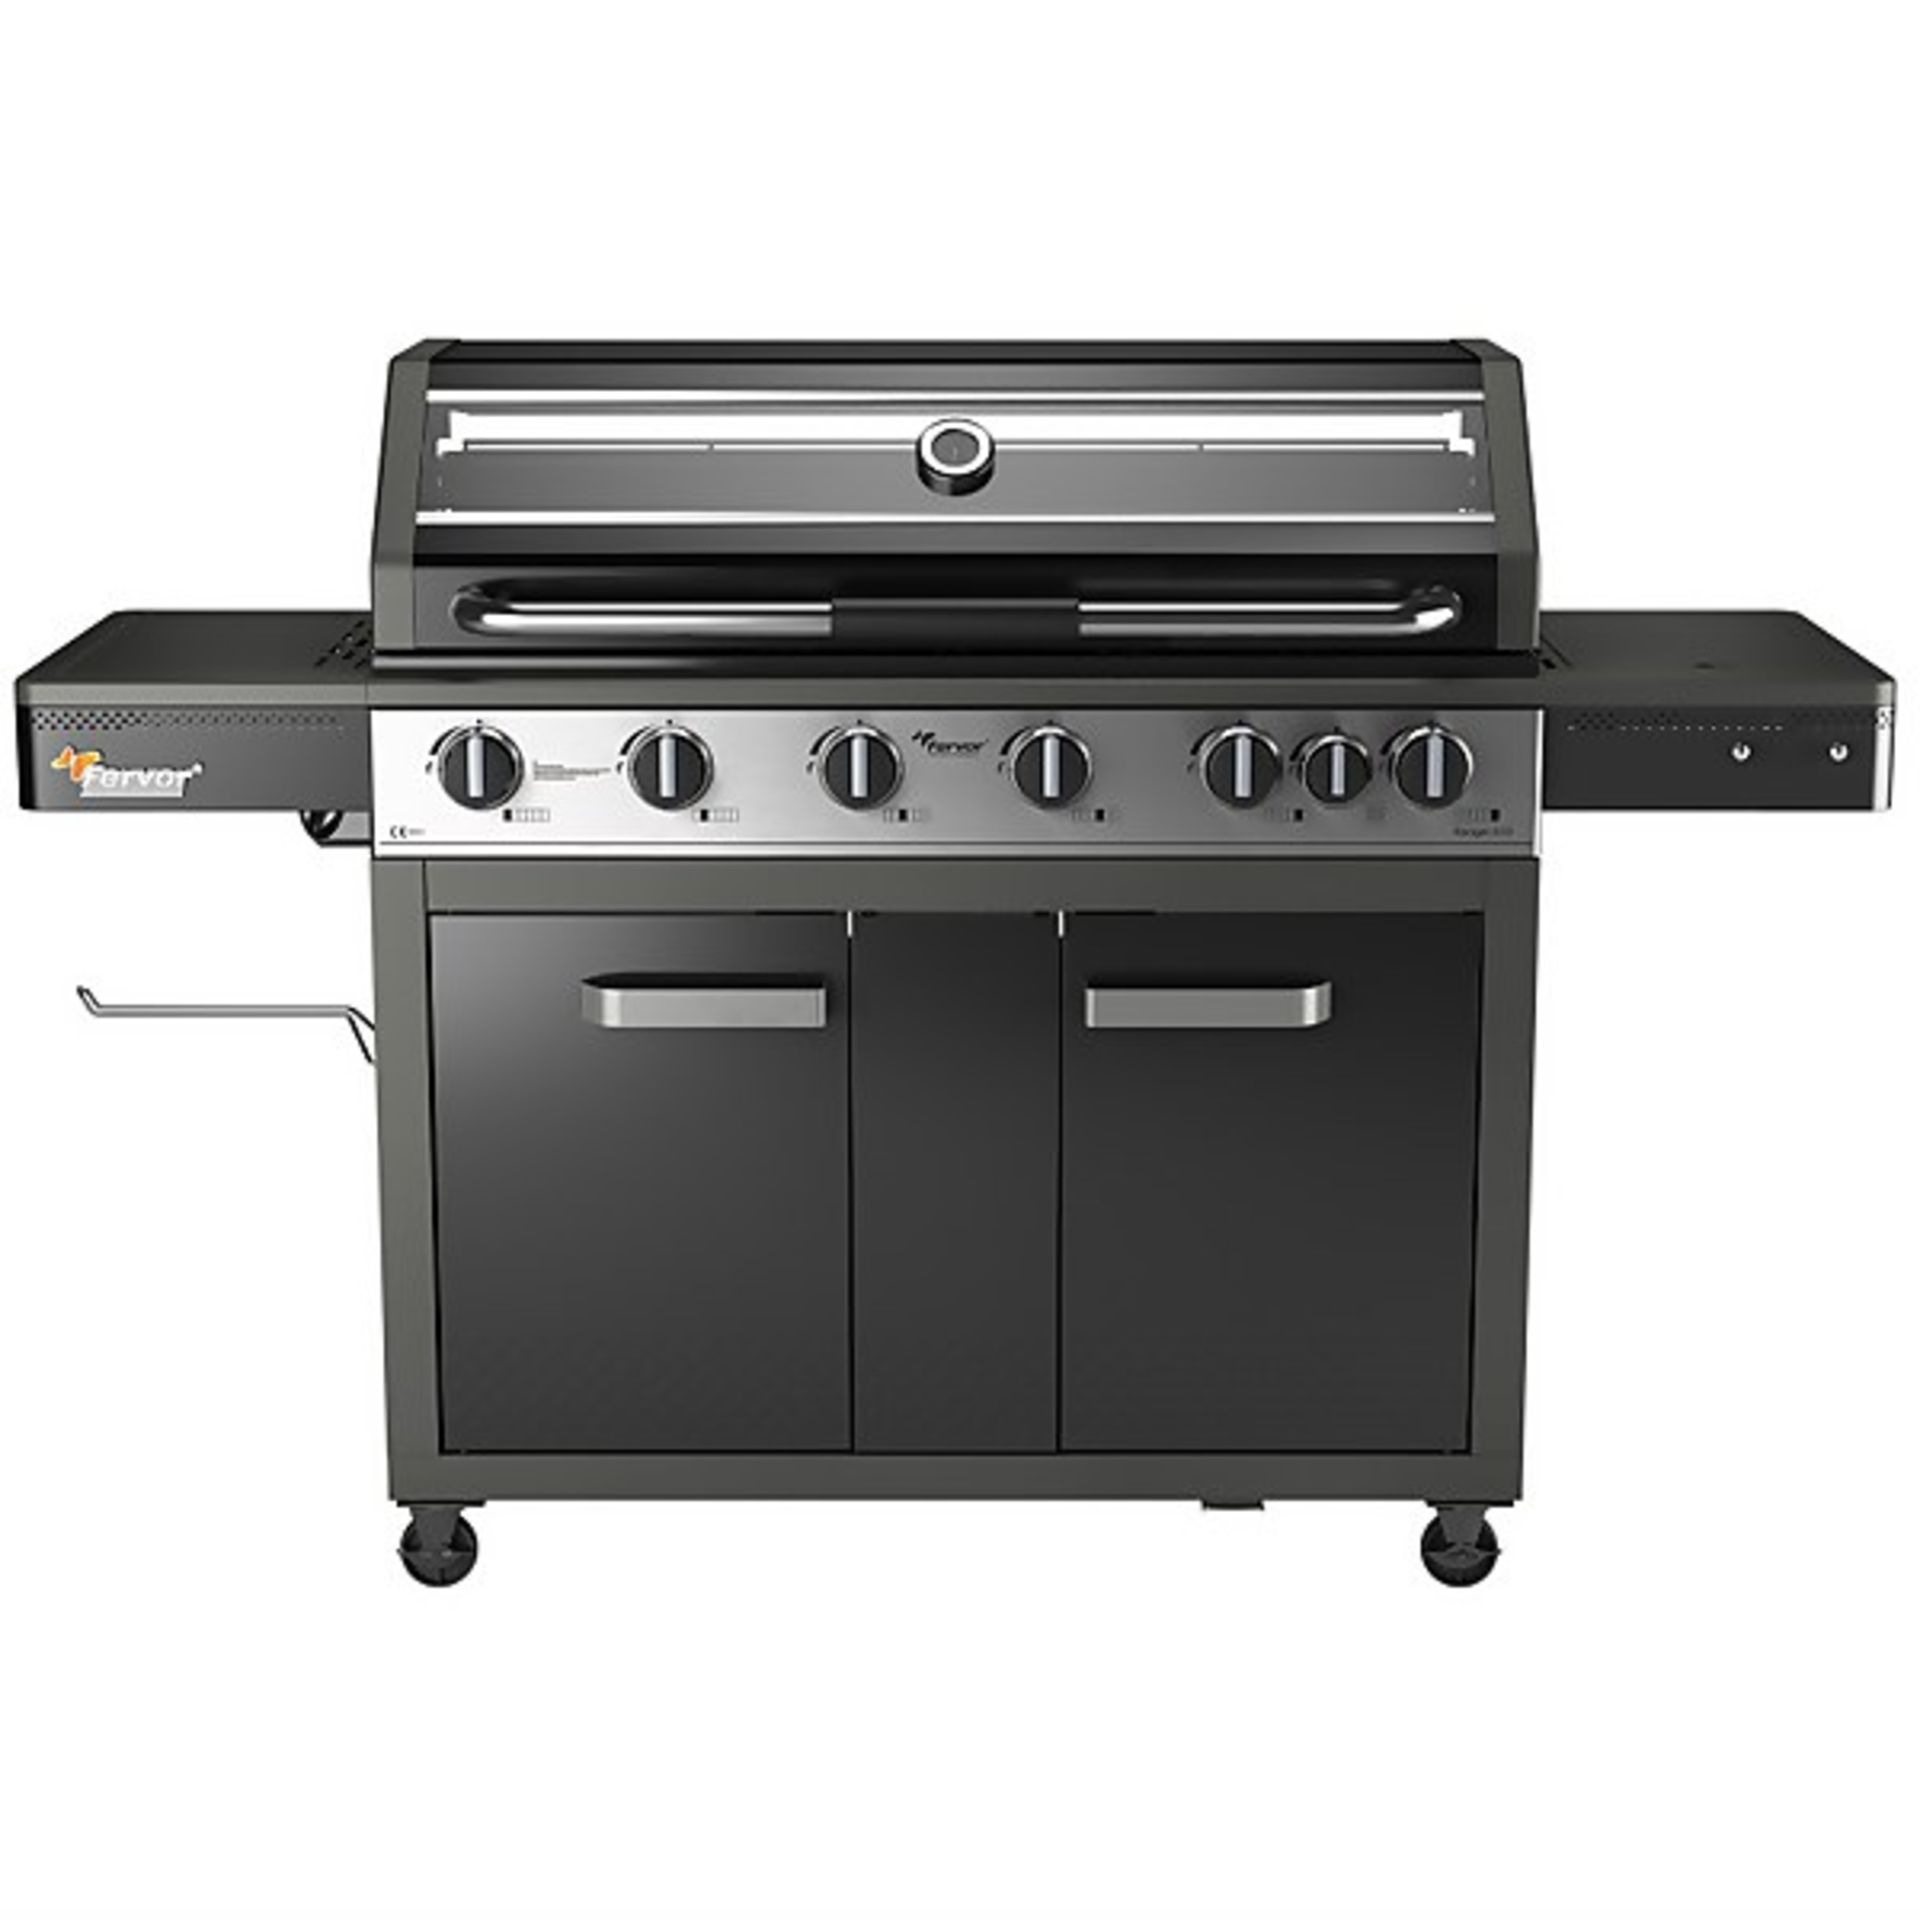 (P) Fervor Ranger 610 6 Burner Gas BBQ RRP £330. New, Banded Item With Box Damage. (Contents Not Ch